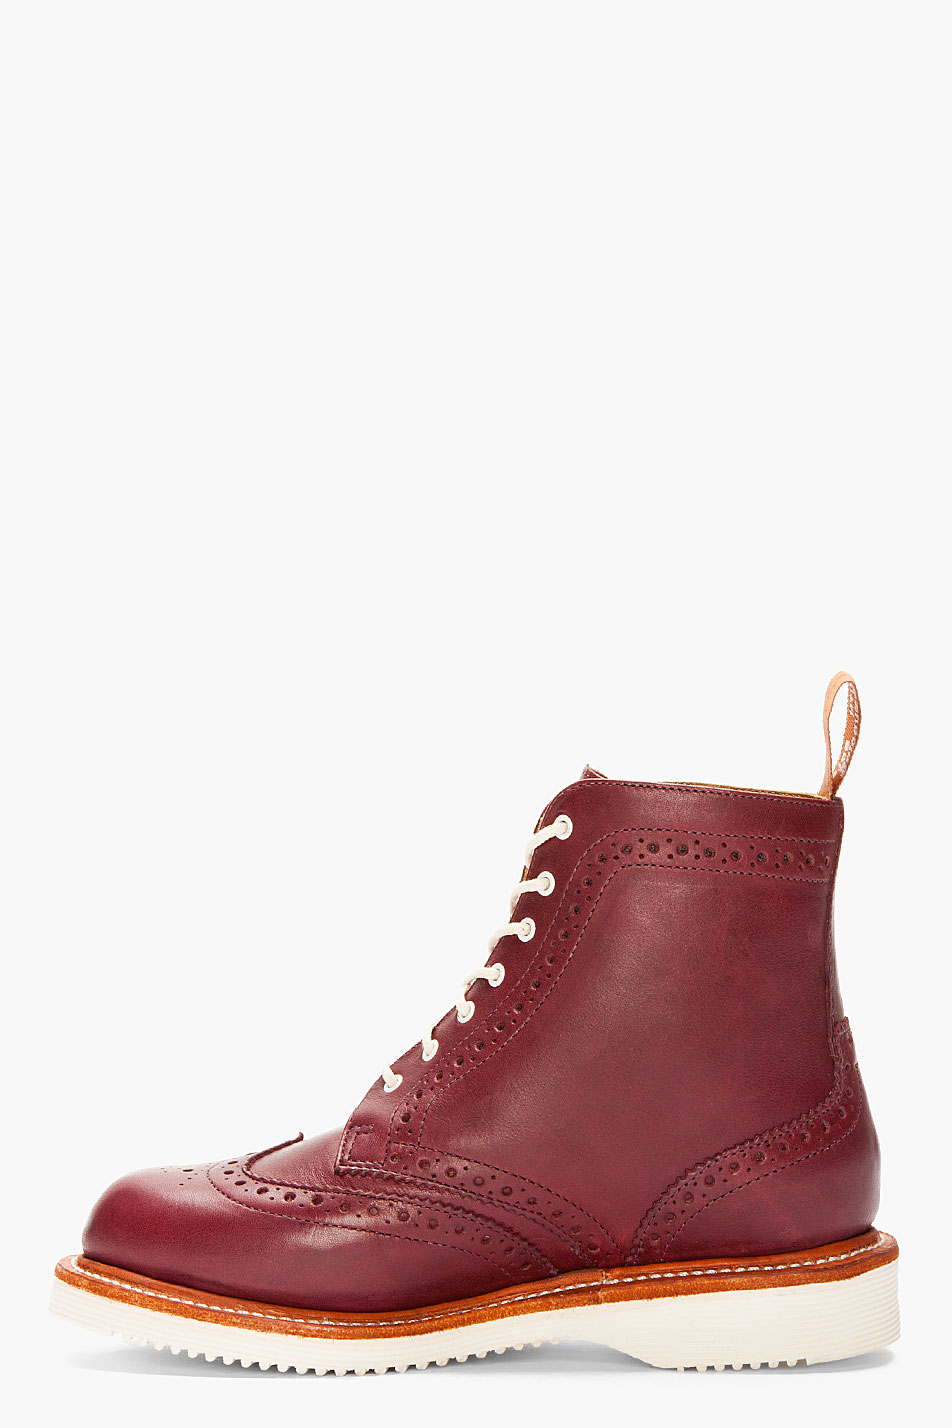 Dr. Martens Burgundy Leather Bentley Wingtip Brogue Boots in Red - Lyst